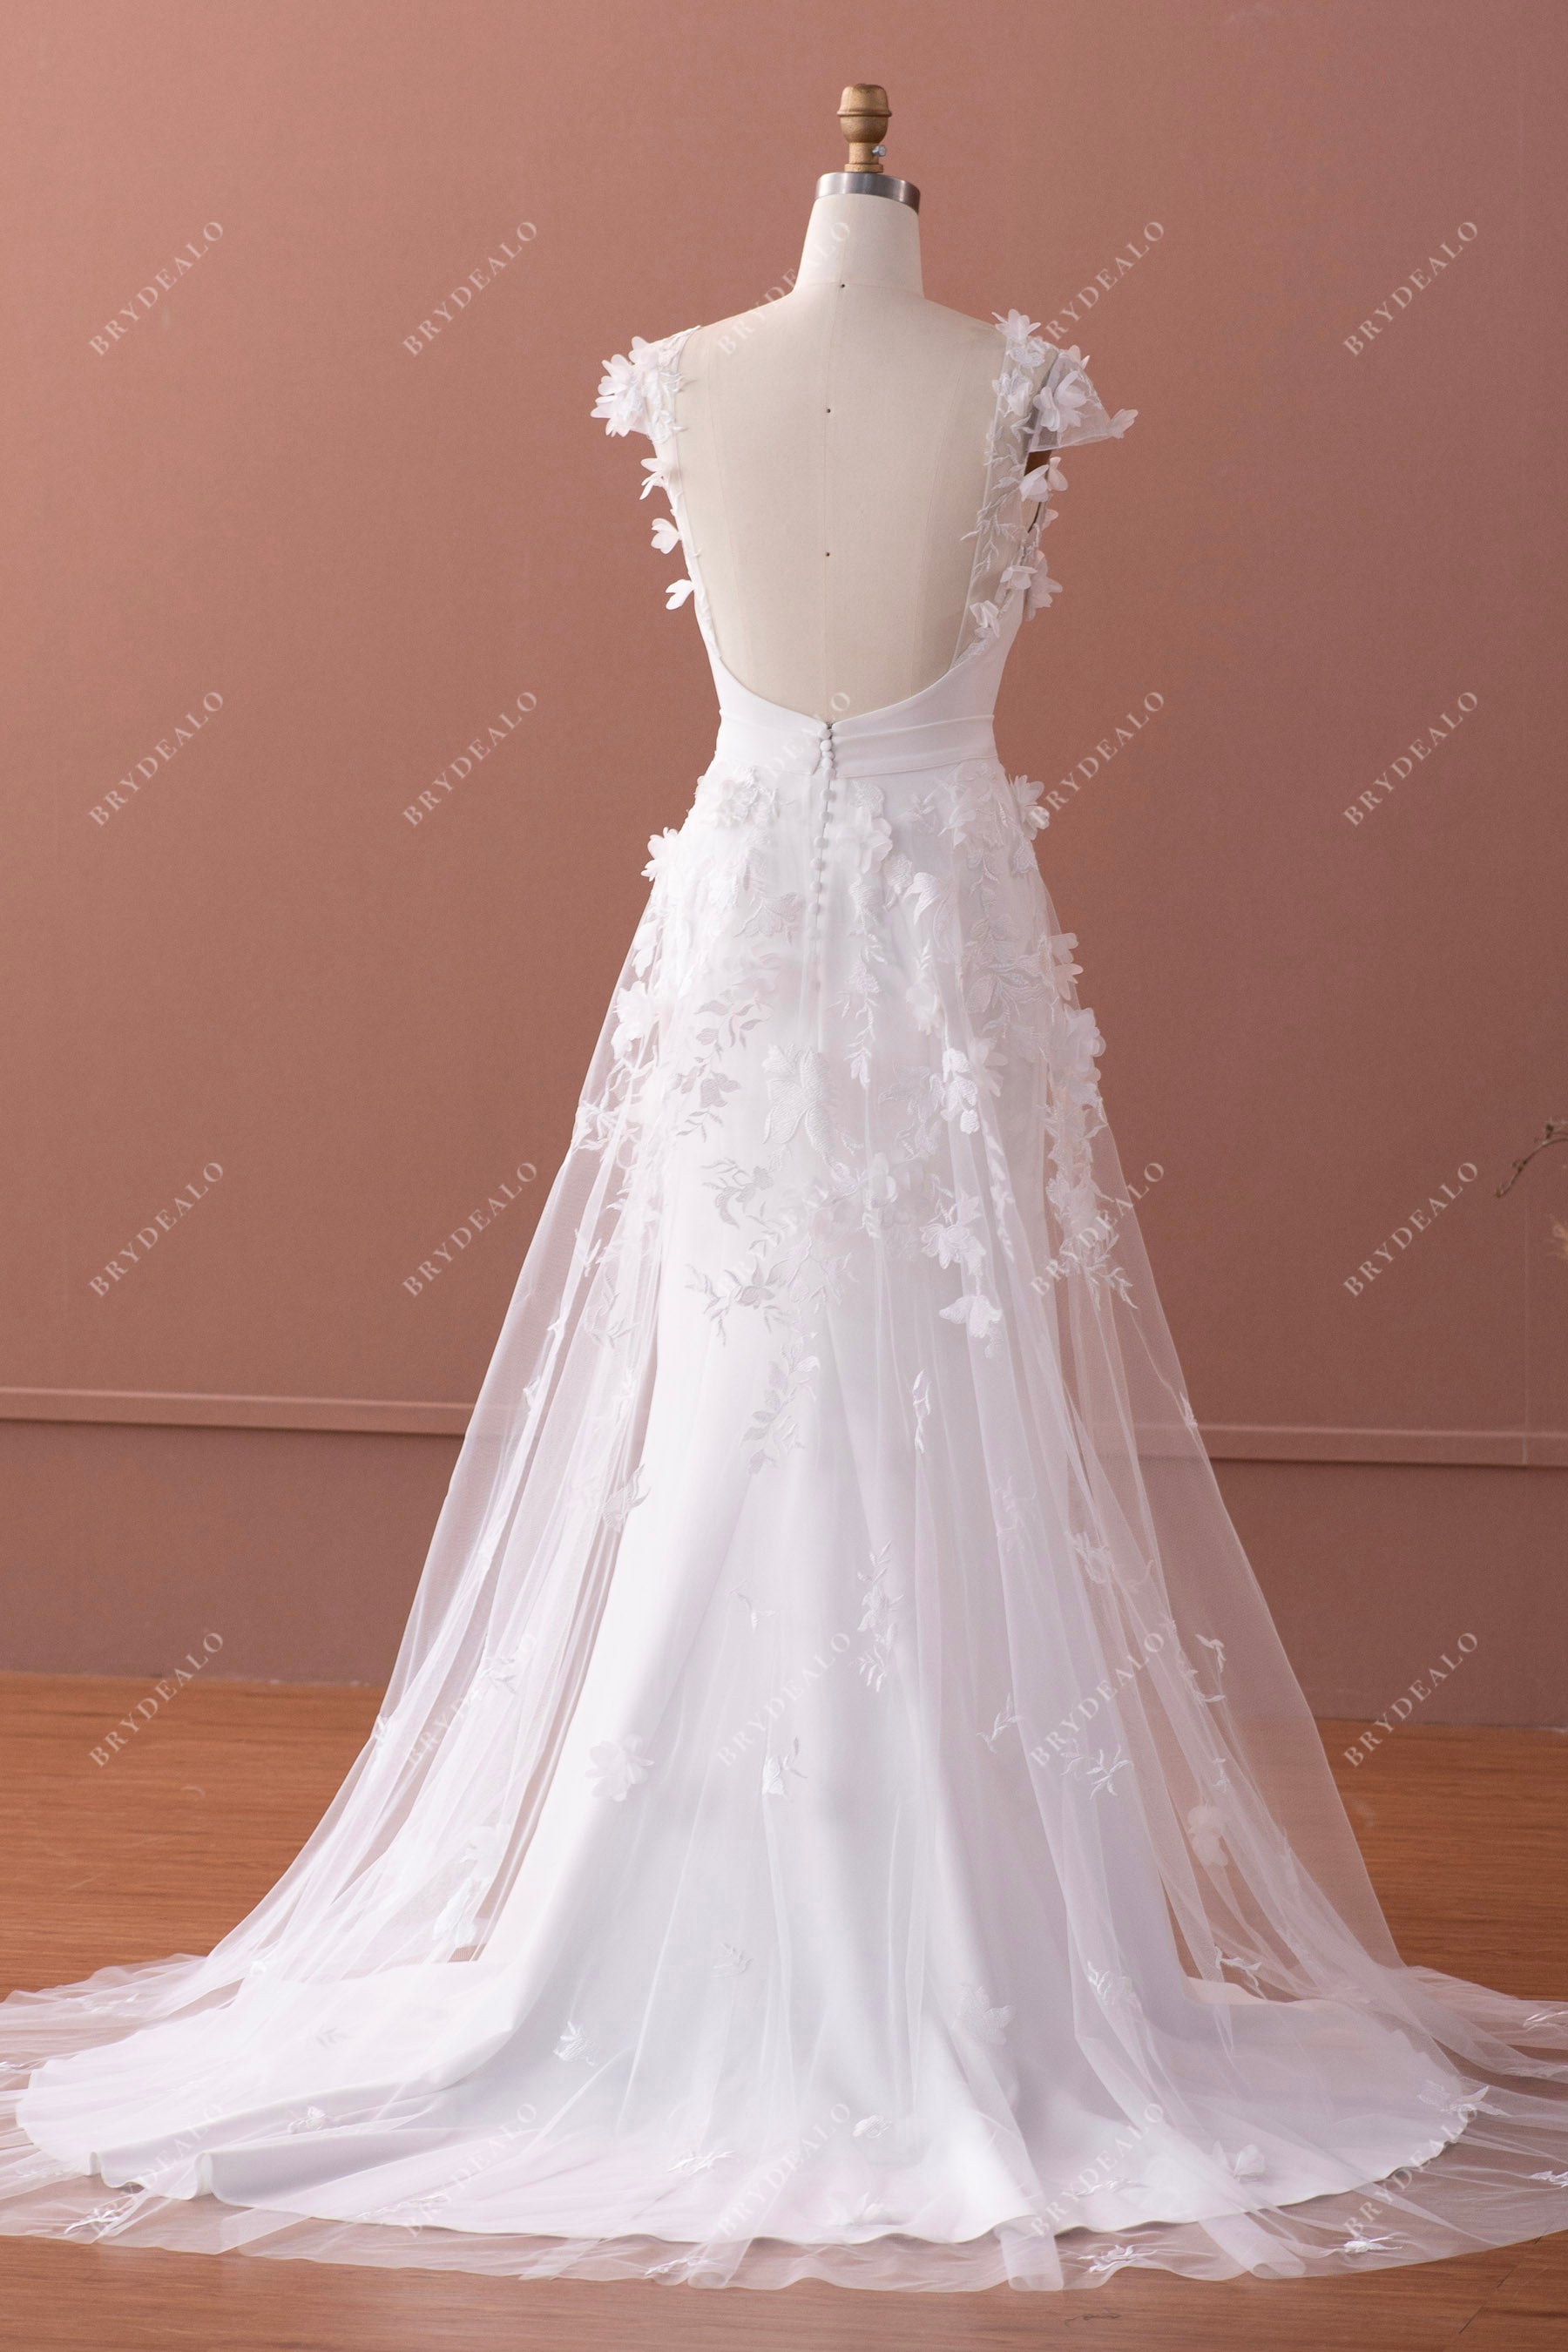 flower lace wedding dress with detachable overskirt